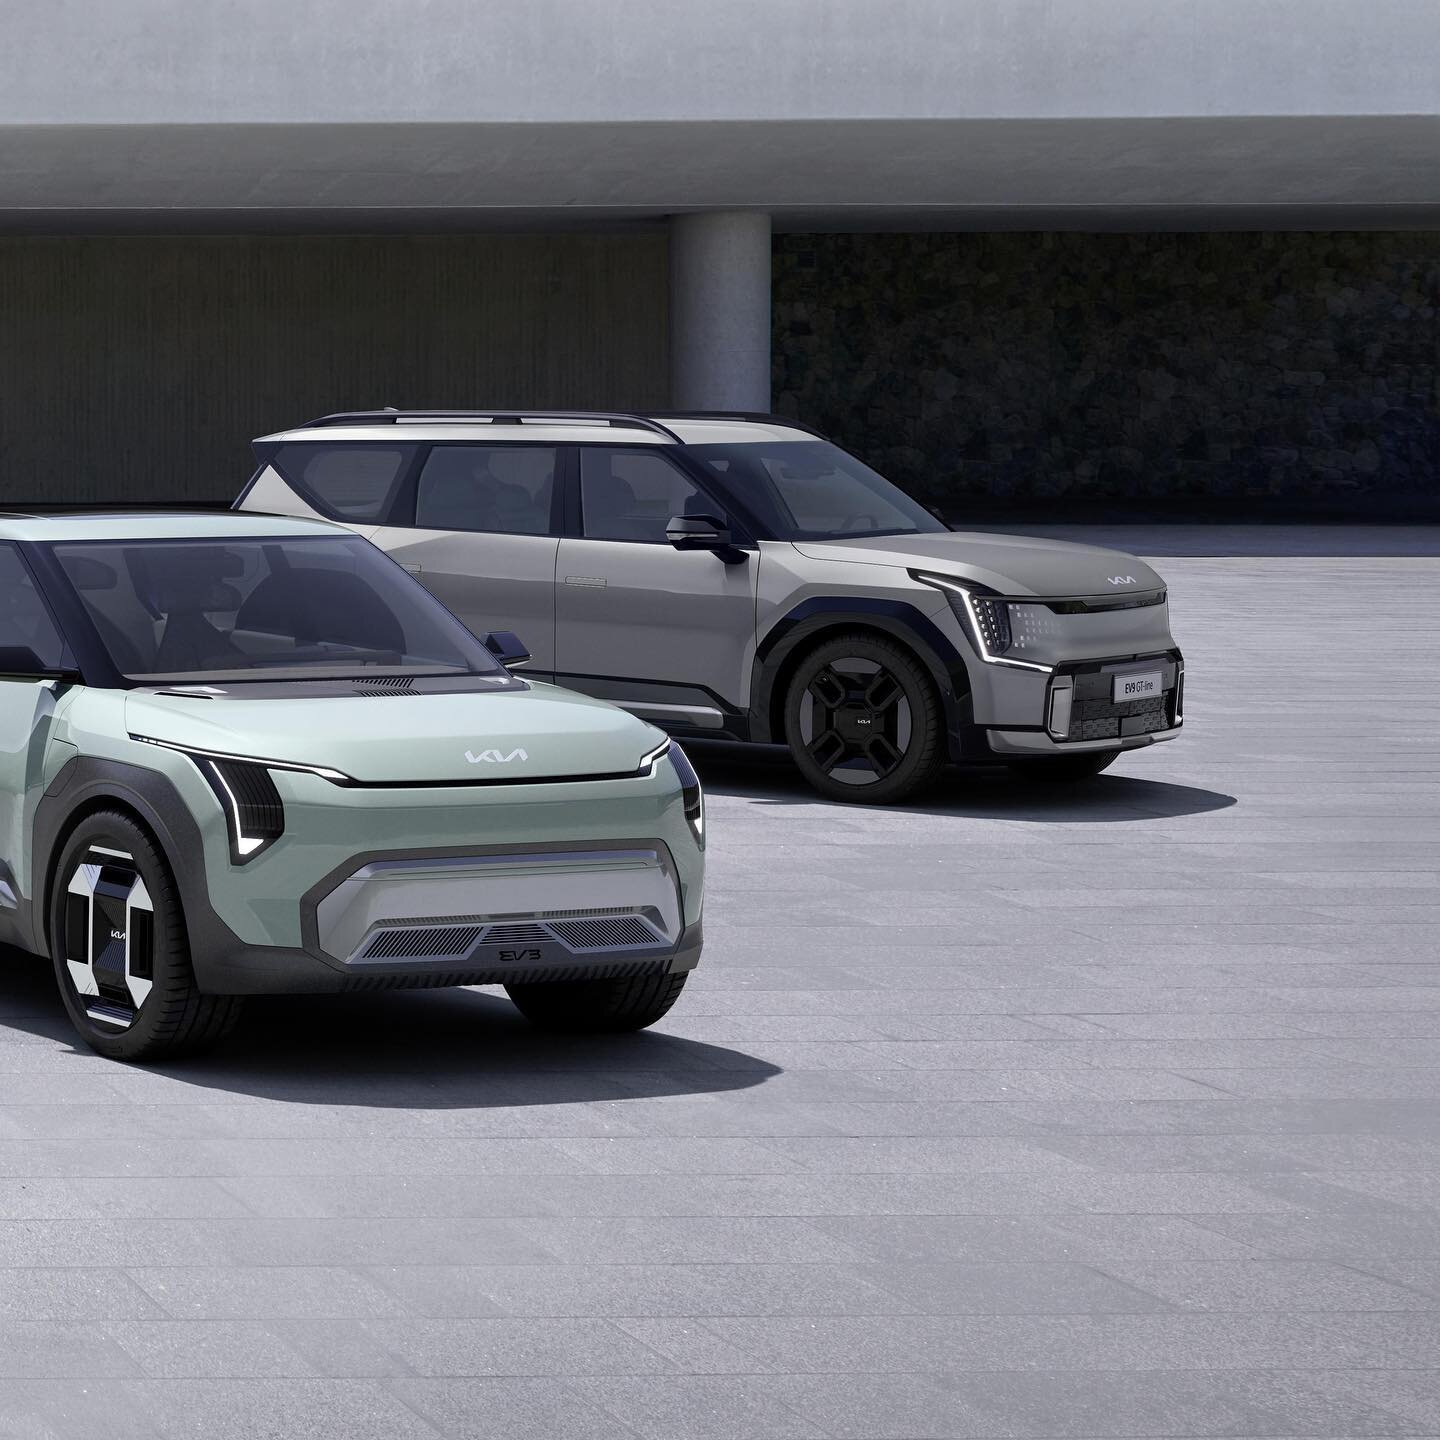 Kia future EV line-up.

Introducing our production Kia EV5 and the two Kia concept cars, EV3 and EV4.

Congratulations to our design teams around the globe for their amazing work! 
Proud to be part of this journey! 

#kia #kiadesign #movementthatinsp